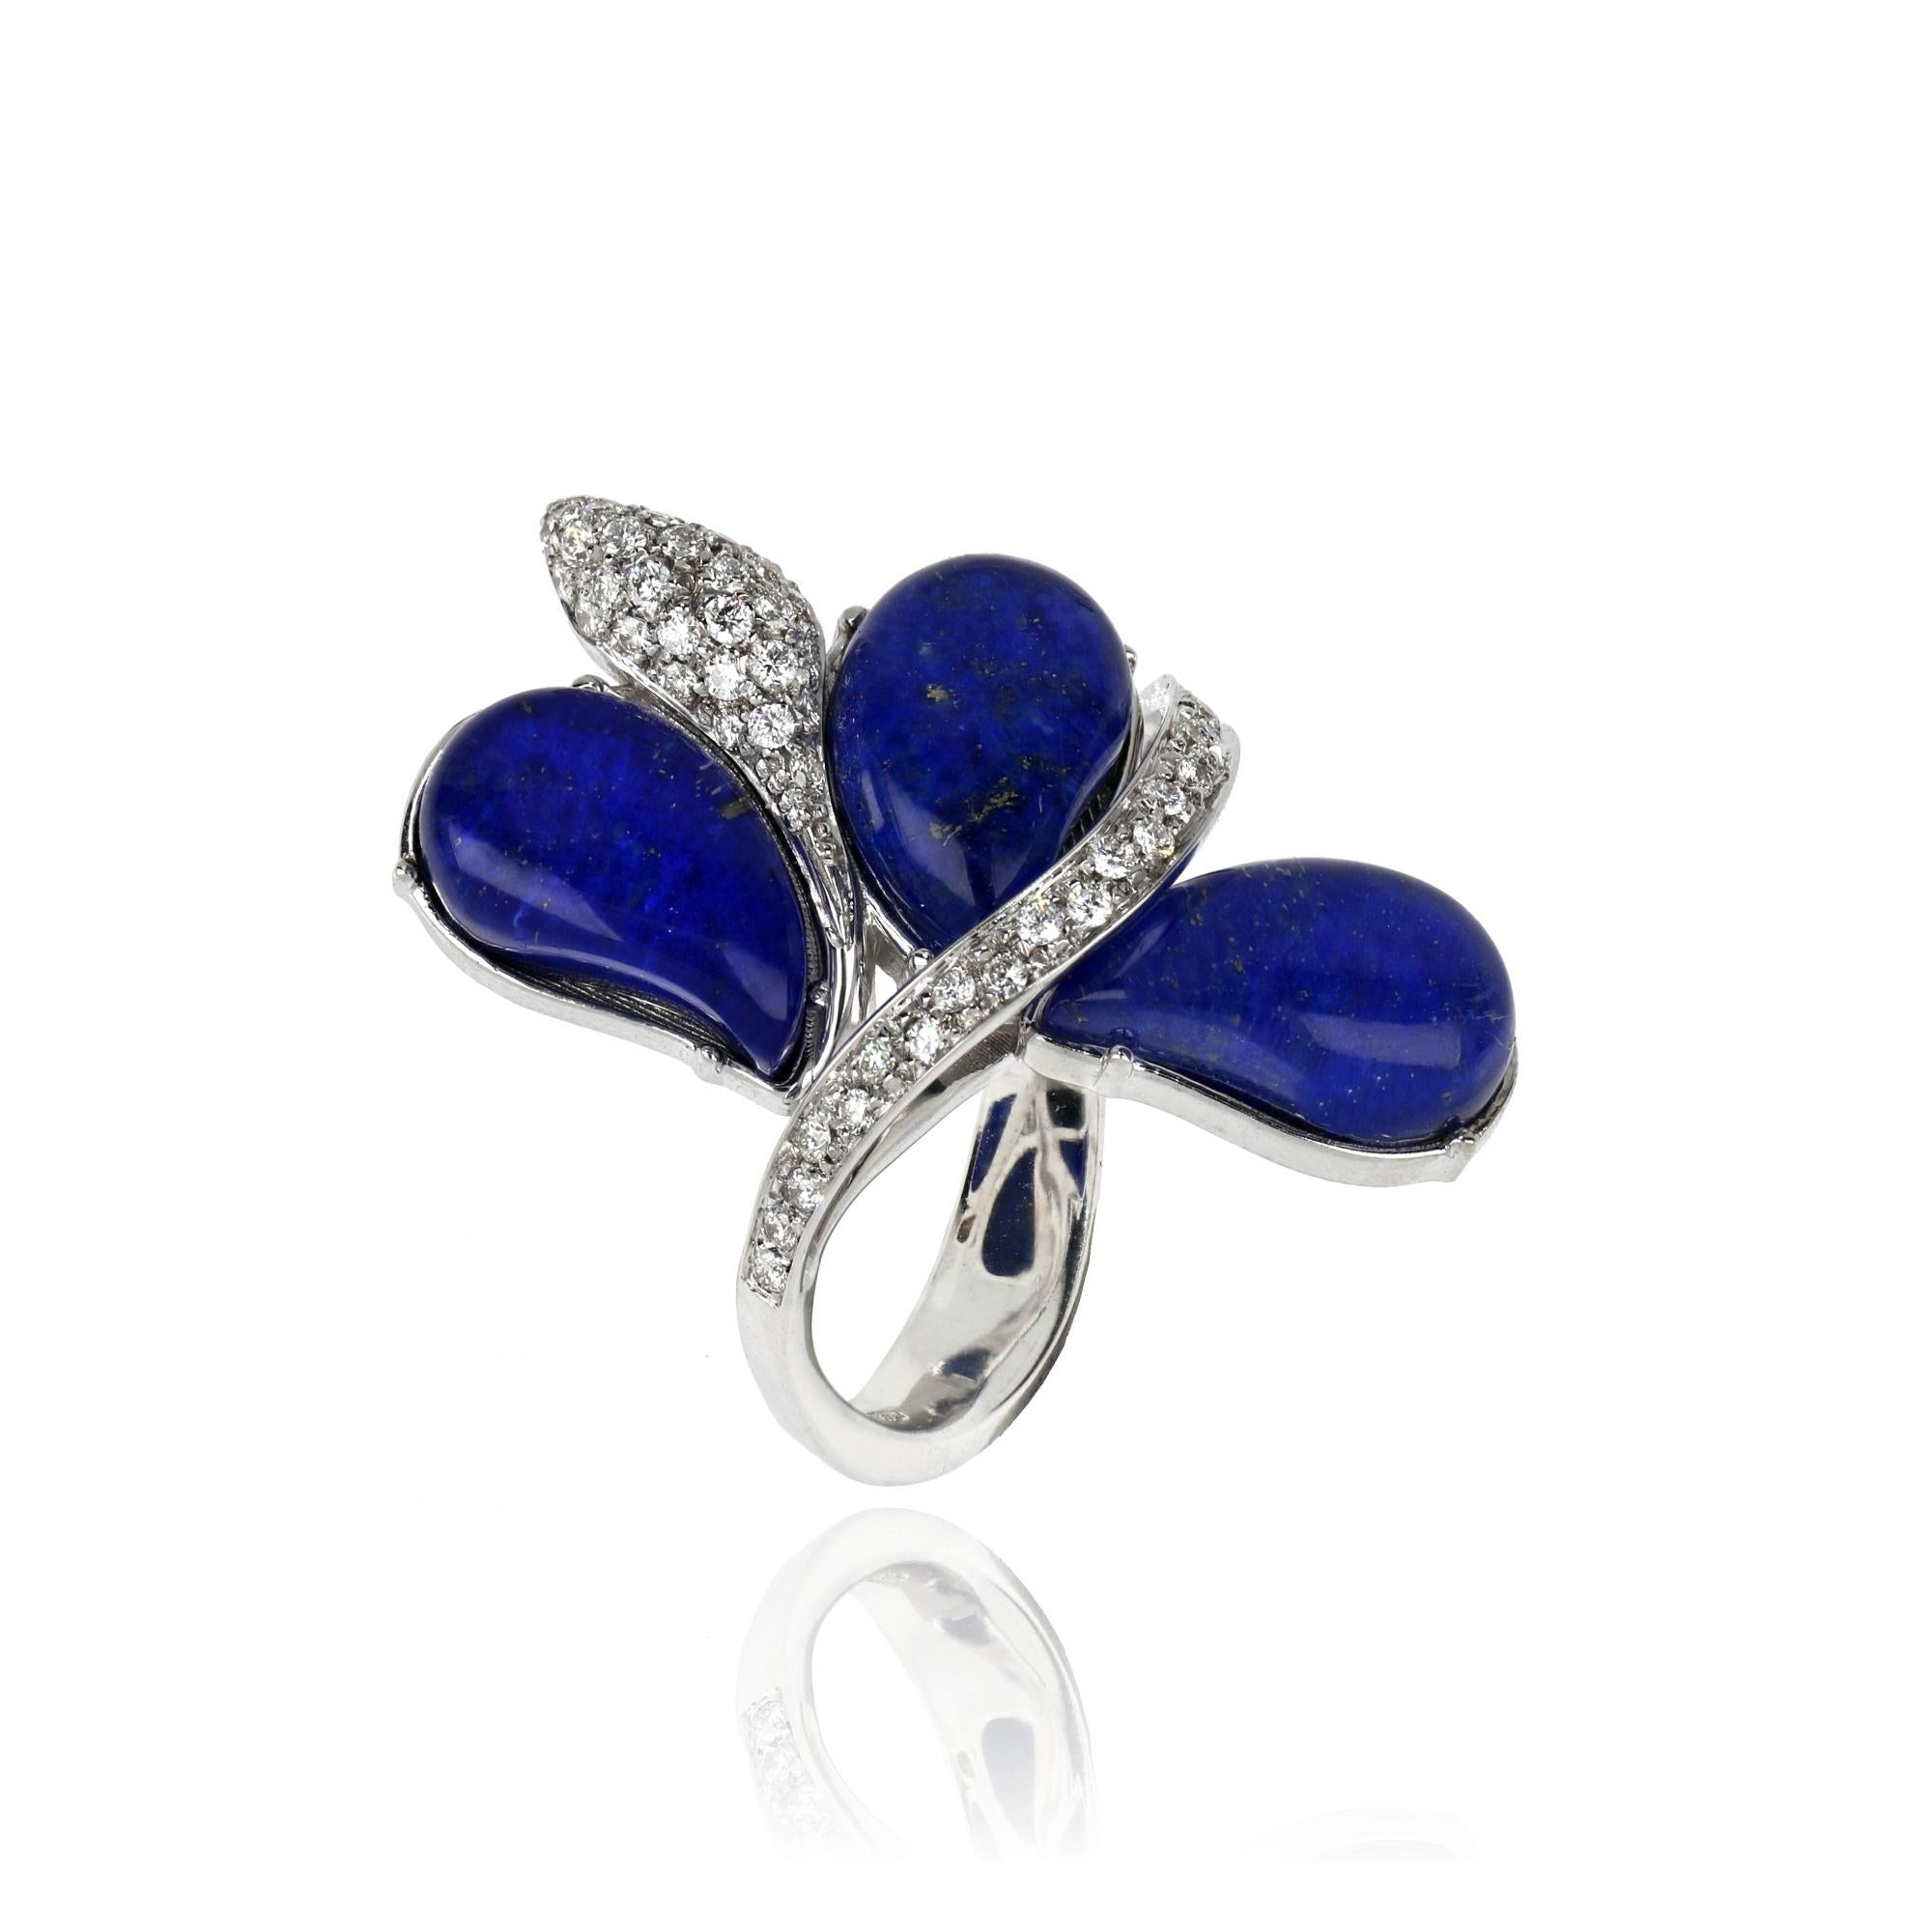 For Sale:  18kt White Gold Les Fleurs Ring with Blue Lapis Lazuli Drops and Diamonds 3